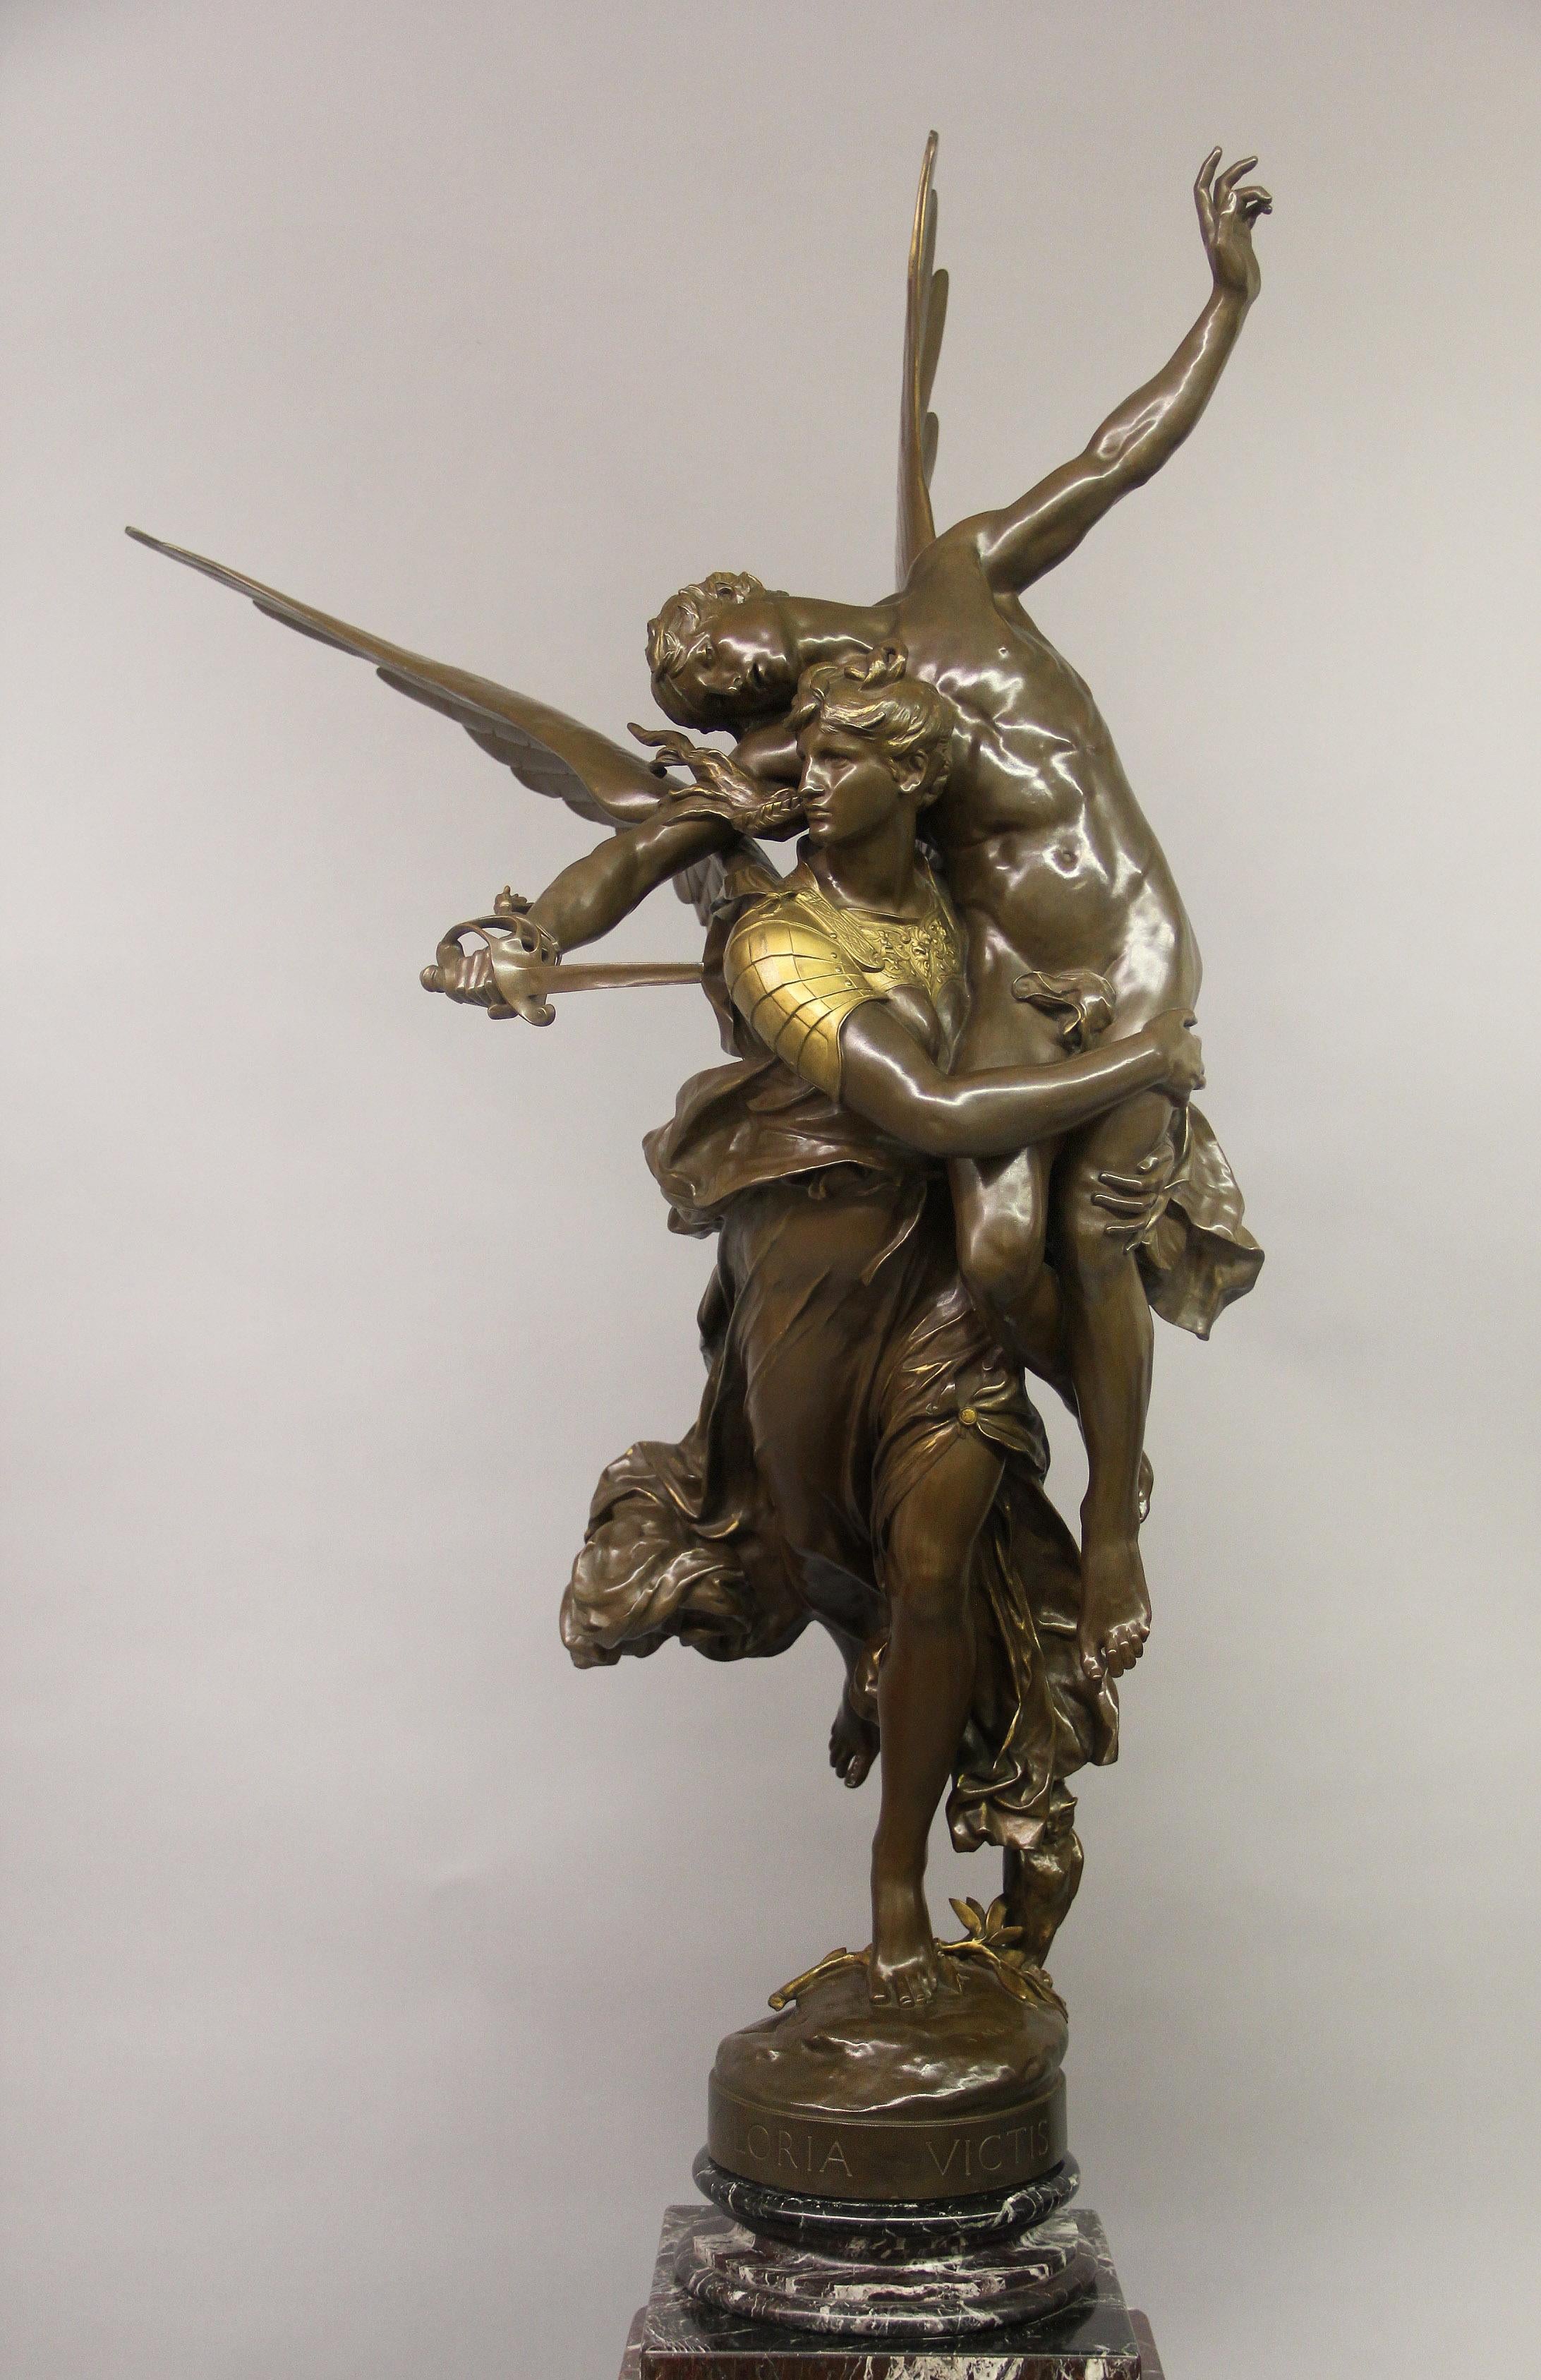 The wonderful and exceptional Late 19th Century bronze figural sculpture entitled “Gloria Victis” by Mercié and Barbedienne

Antonin Mercié and Ferdinand Barbedienne

Bronze, mid-brown patina with gilt highlights, raised on a Levanto Rouge